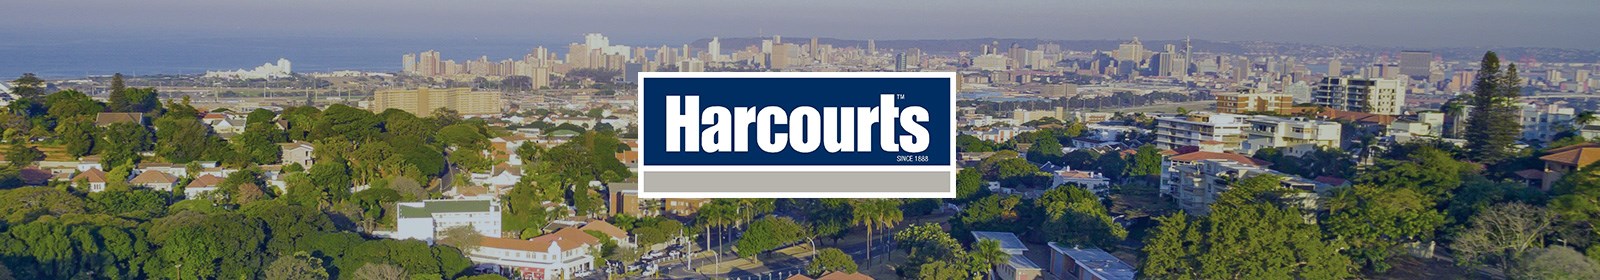 Harcourts, empowering agents to assist clients 